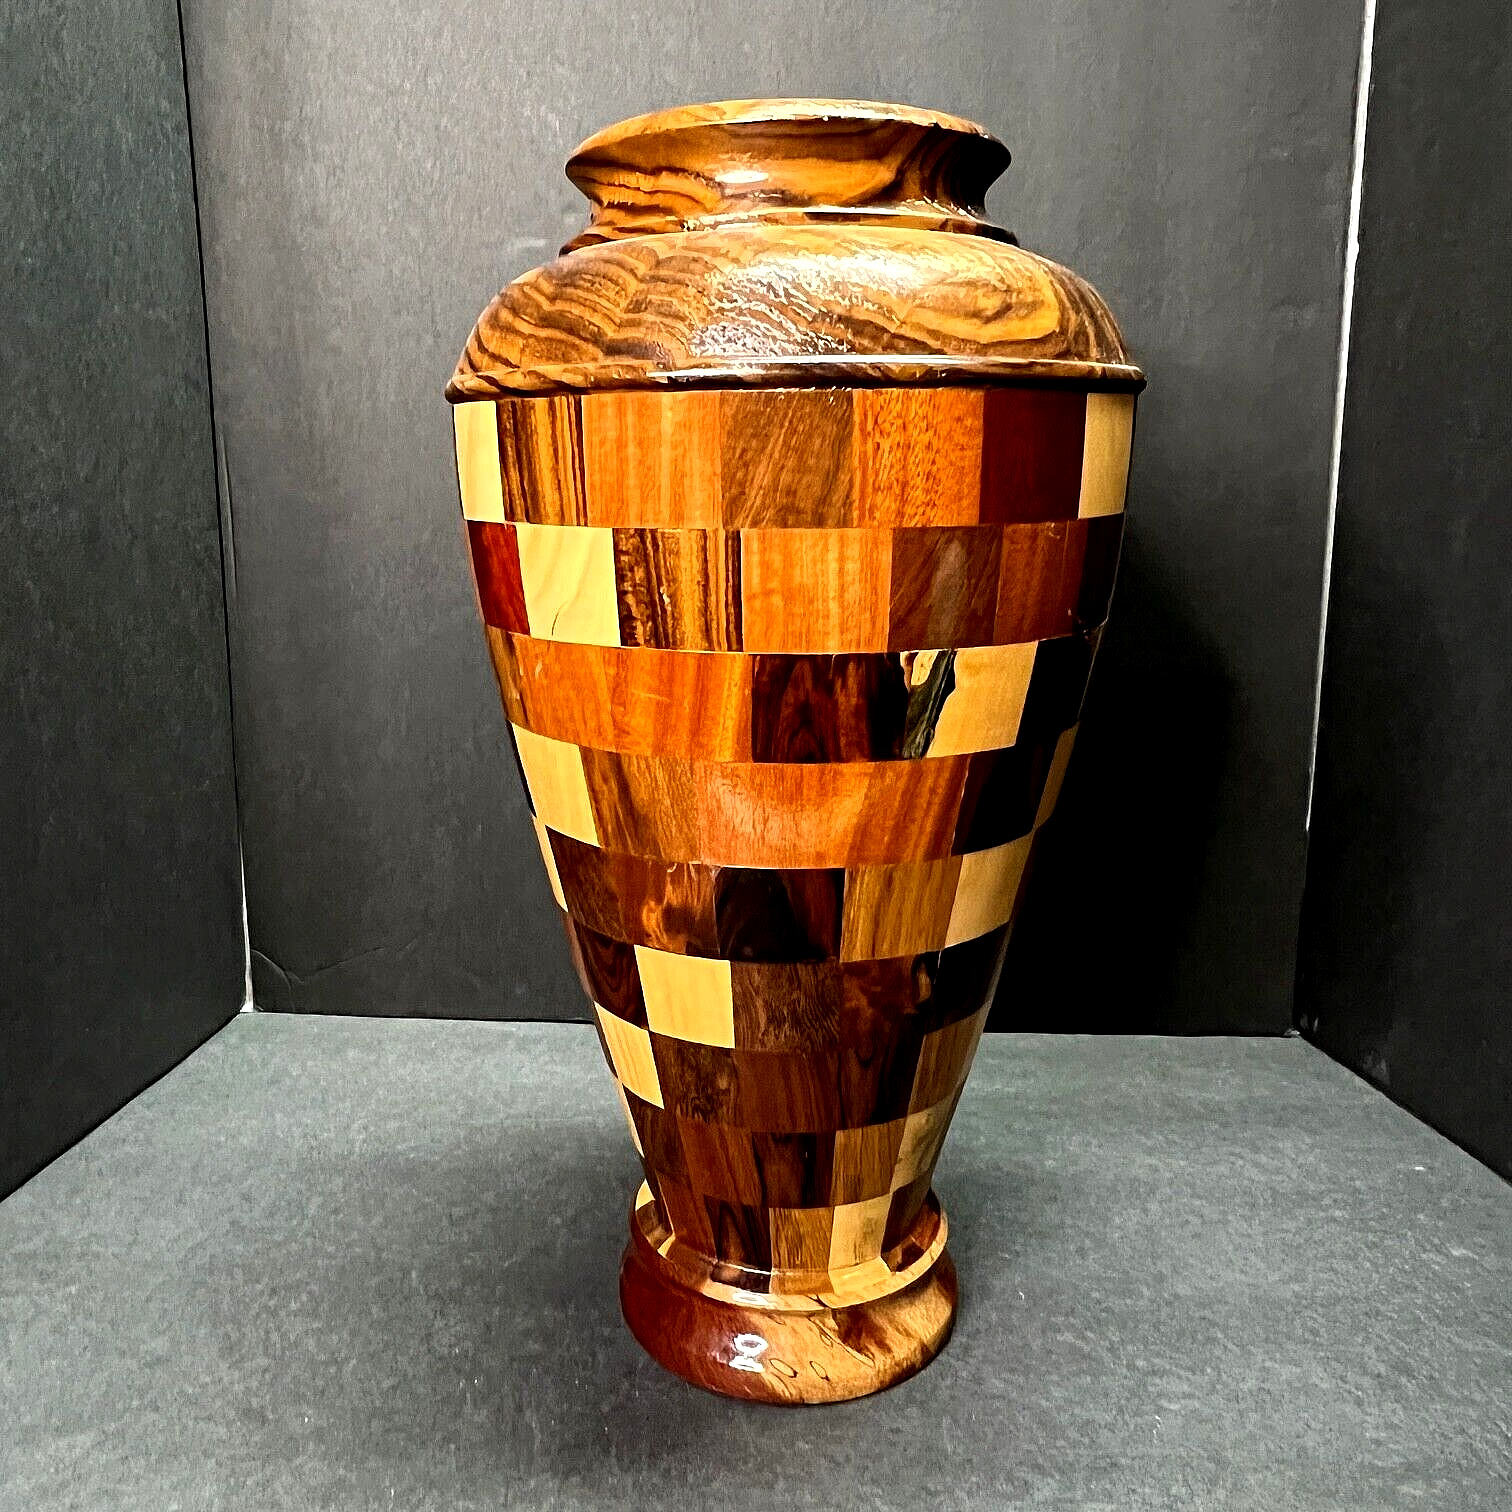 Segmented Wood Vase Large 14.5 inch Hand Crafted Multi-Wood & Color